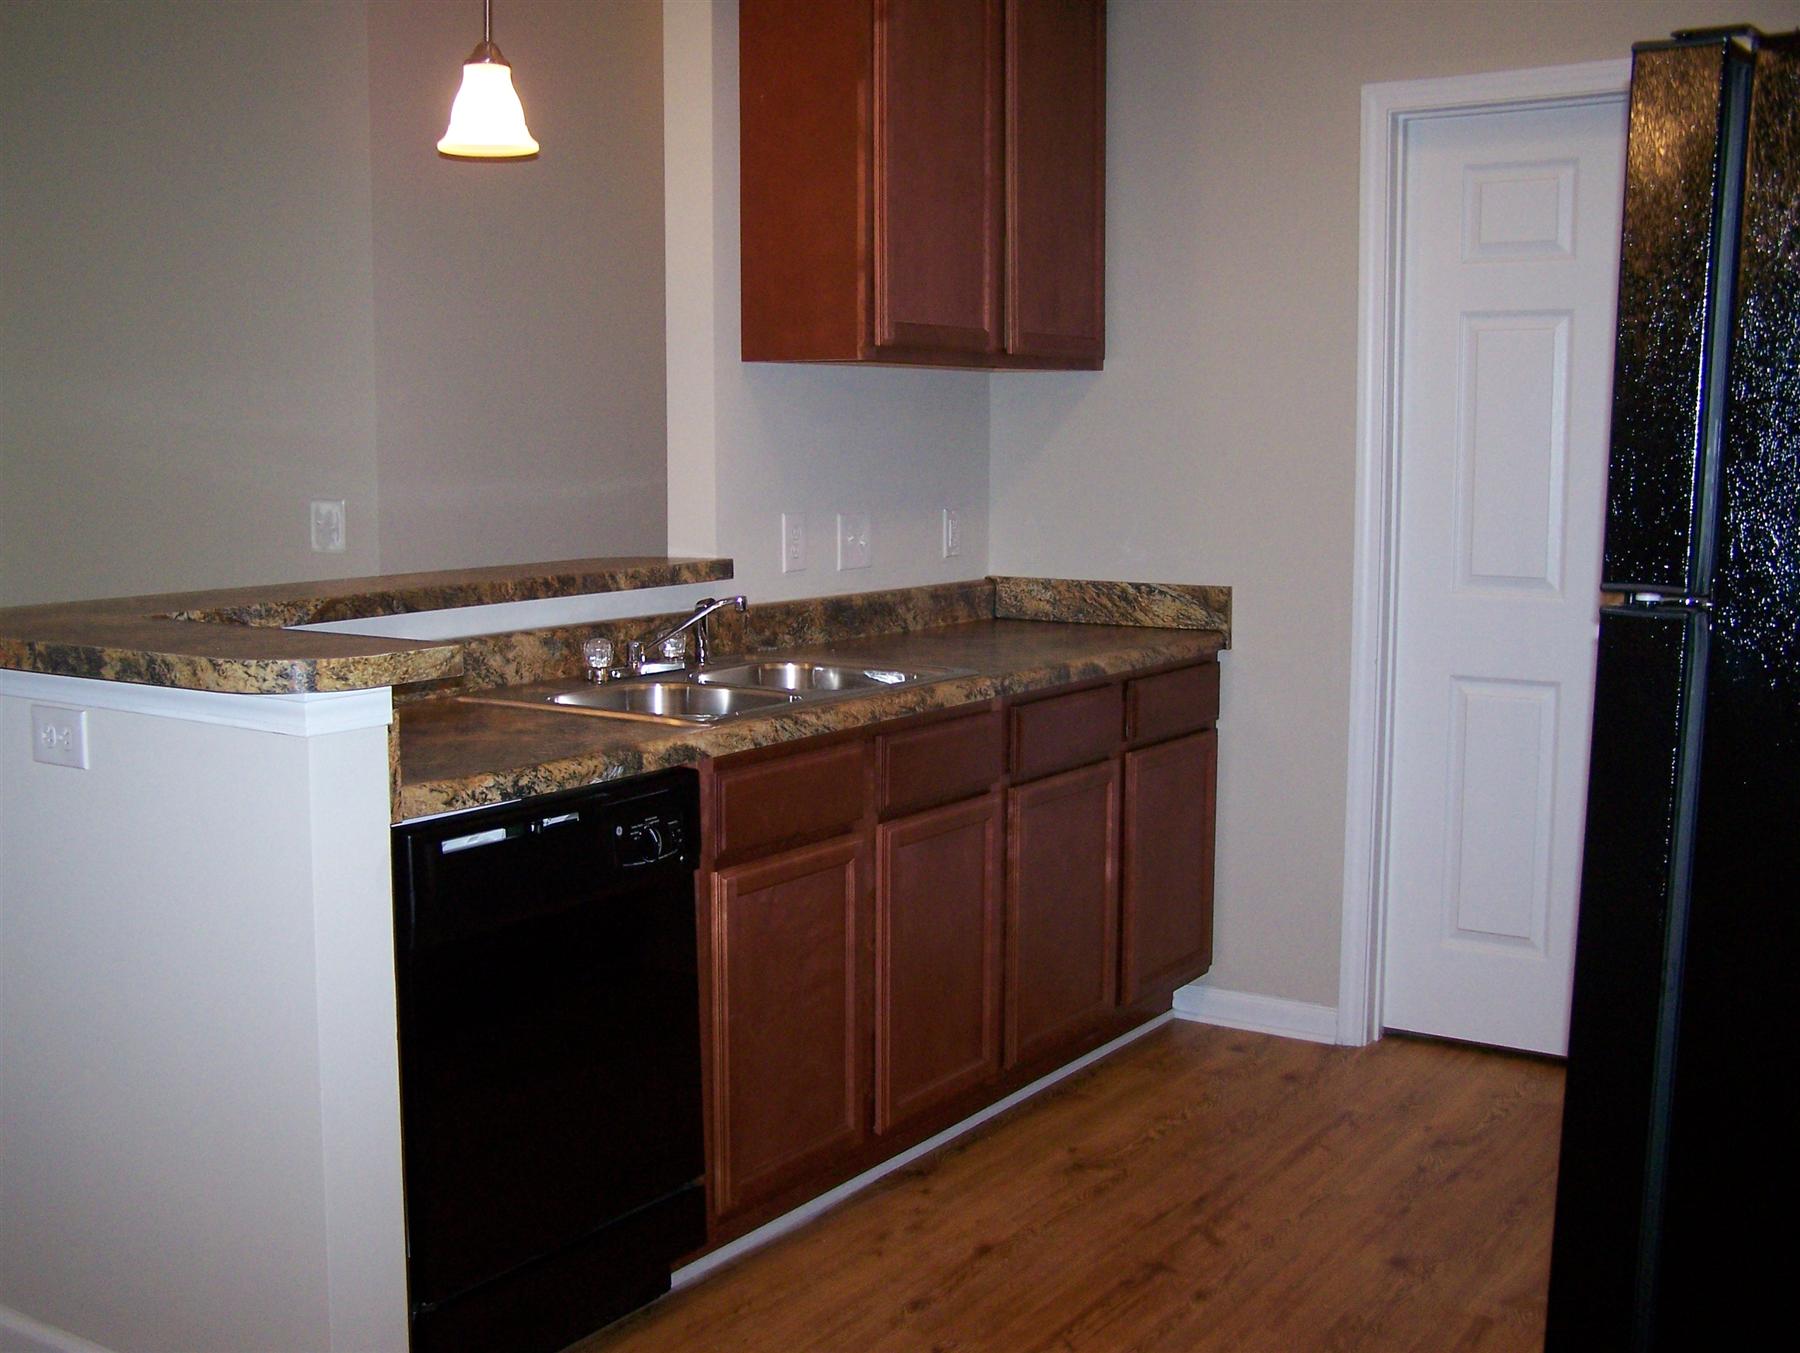 Kitchen with breakfast bar, black appliances and brown cabinets.